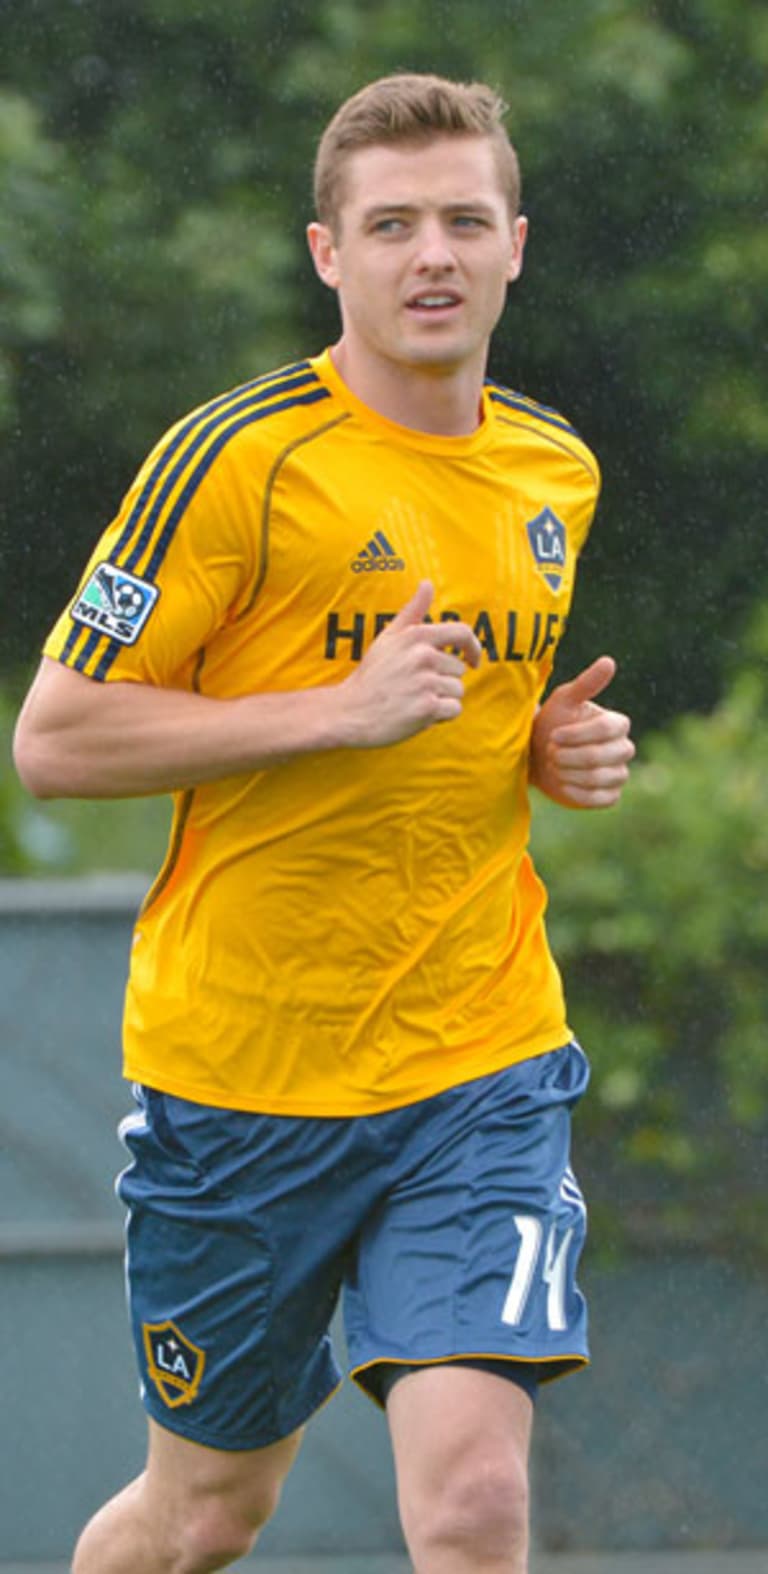 LA Galaxy bank on Robbie Rogers' potential, eye Seattle Sounders match as possible debut -